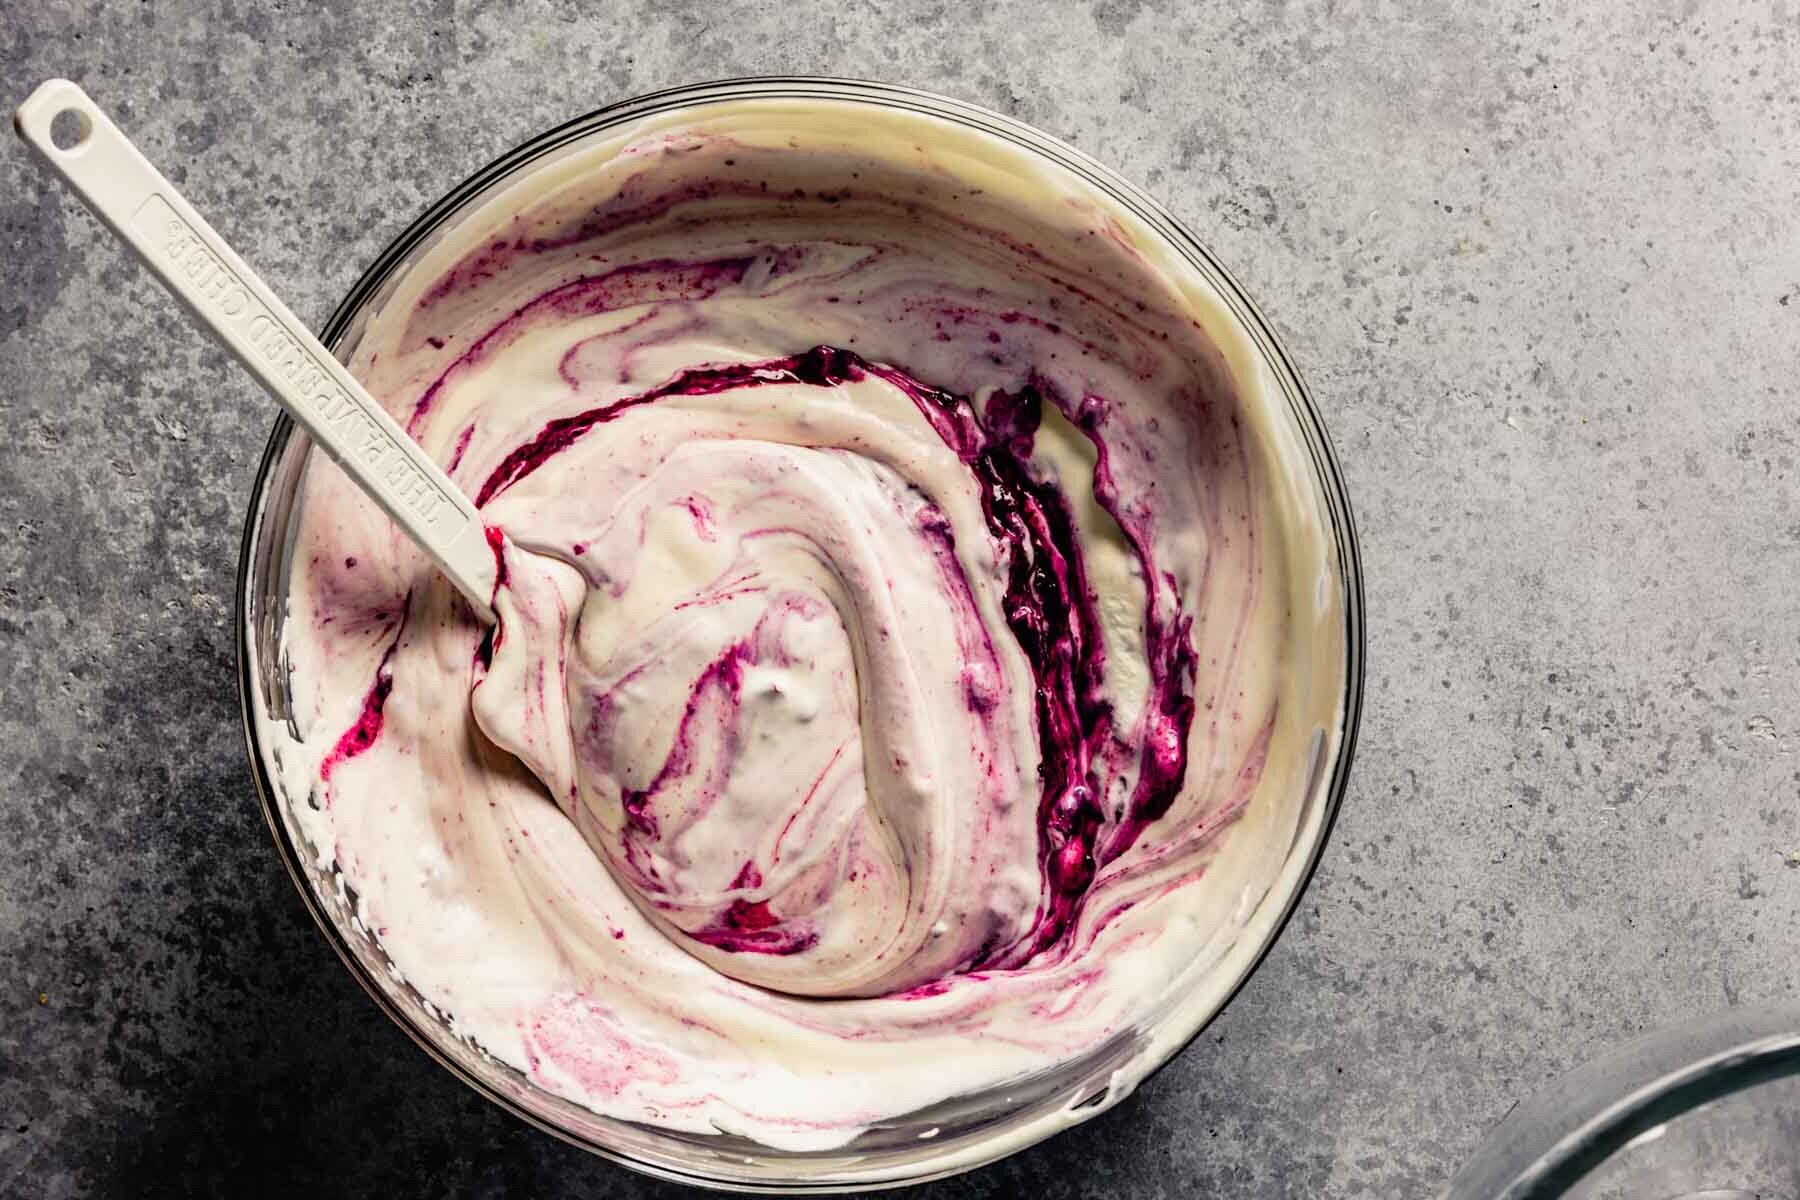 Cherry compote swirled into a creamy mixture in a large glass mixing bowl.